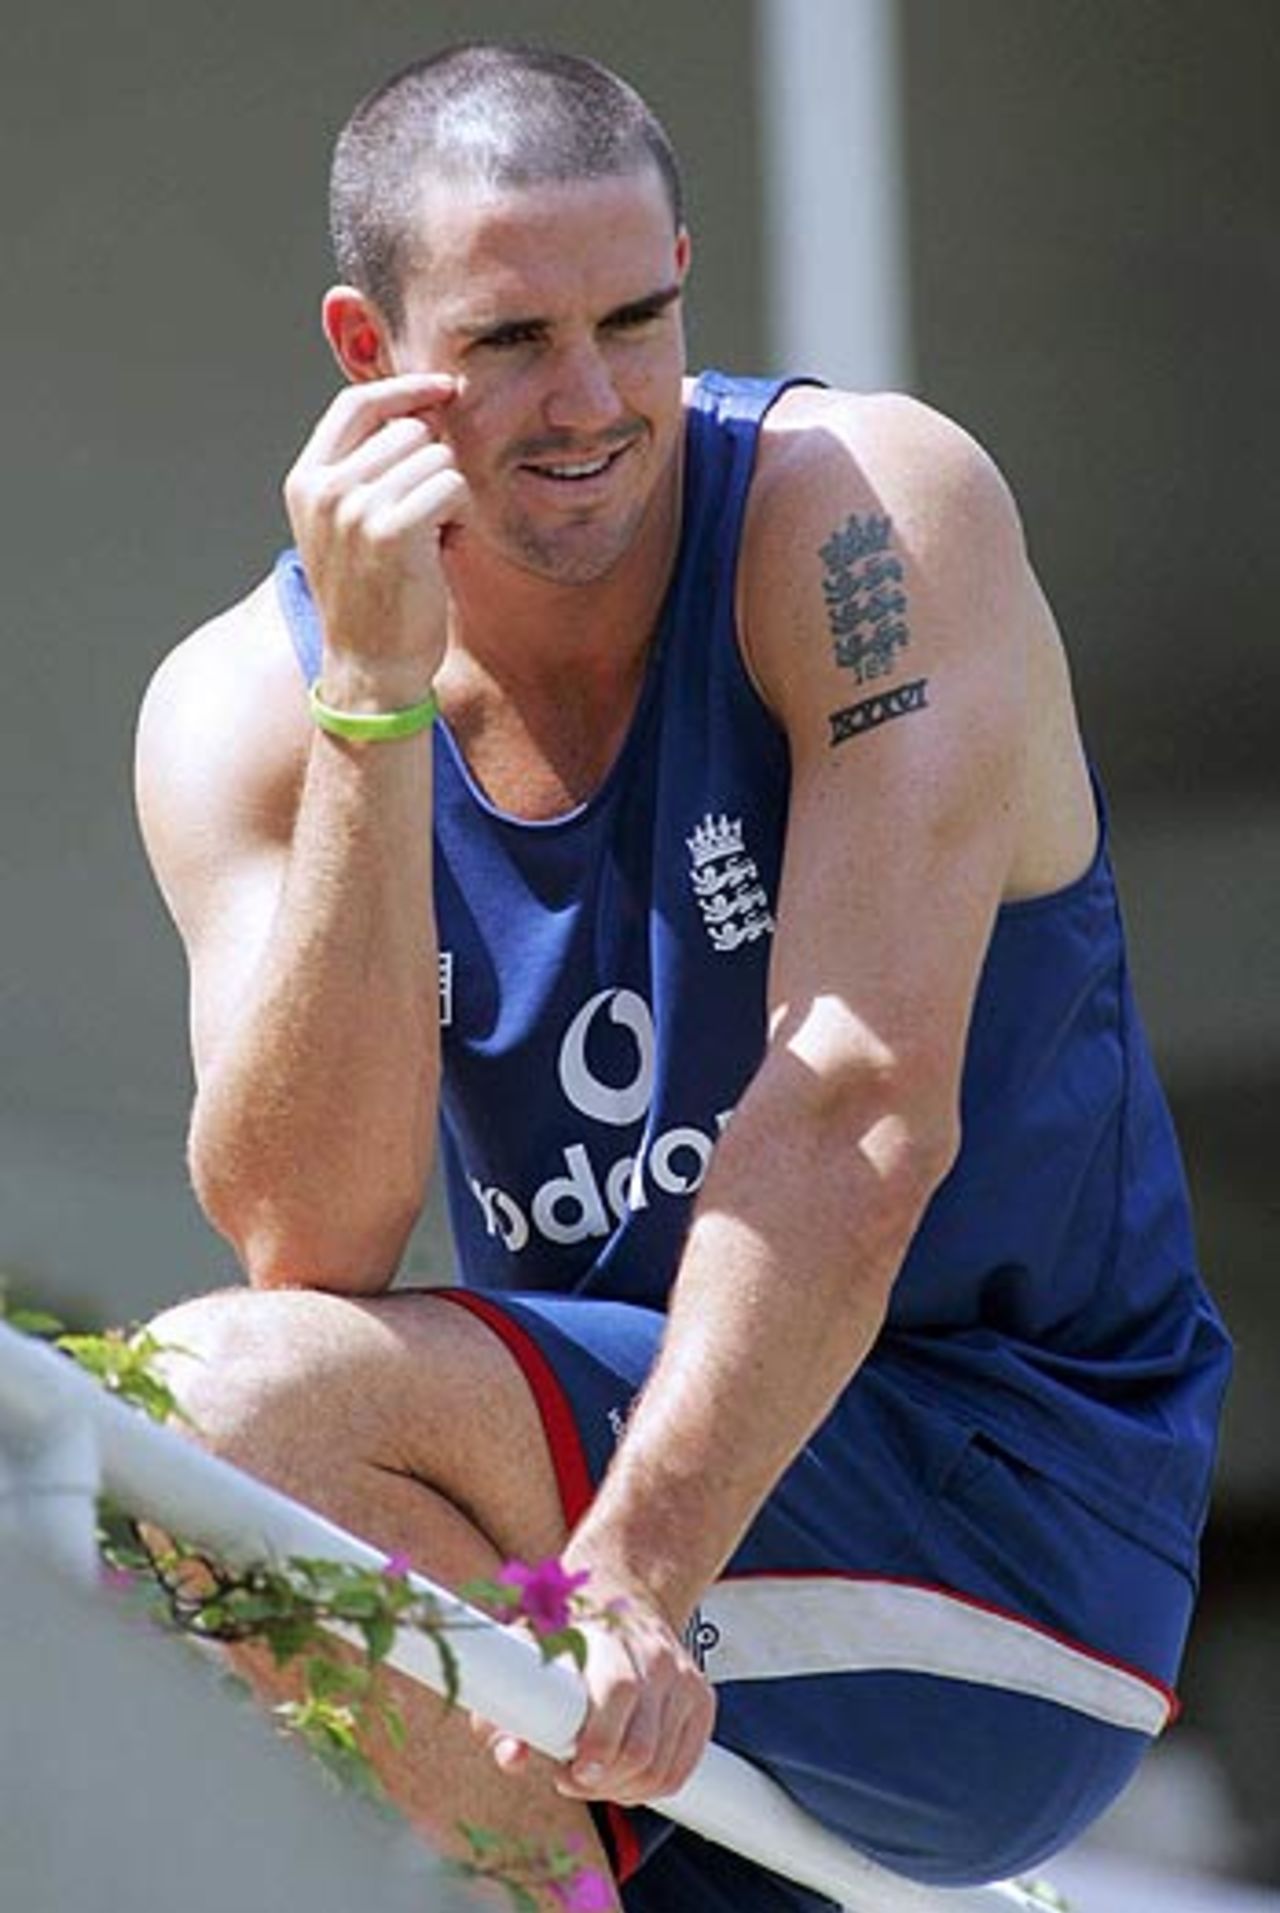 Kevin Pietersen relaxes as England set out to bat in the second innings, Cricket Club of India President's XI v England, Tour Match, Brabourne Stadium, Mumbai, February 20, 2006